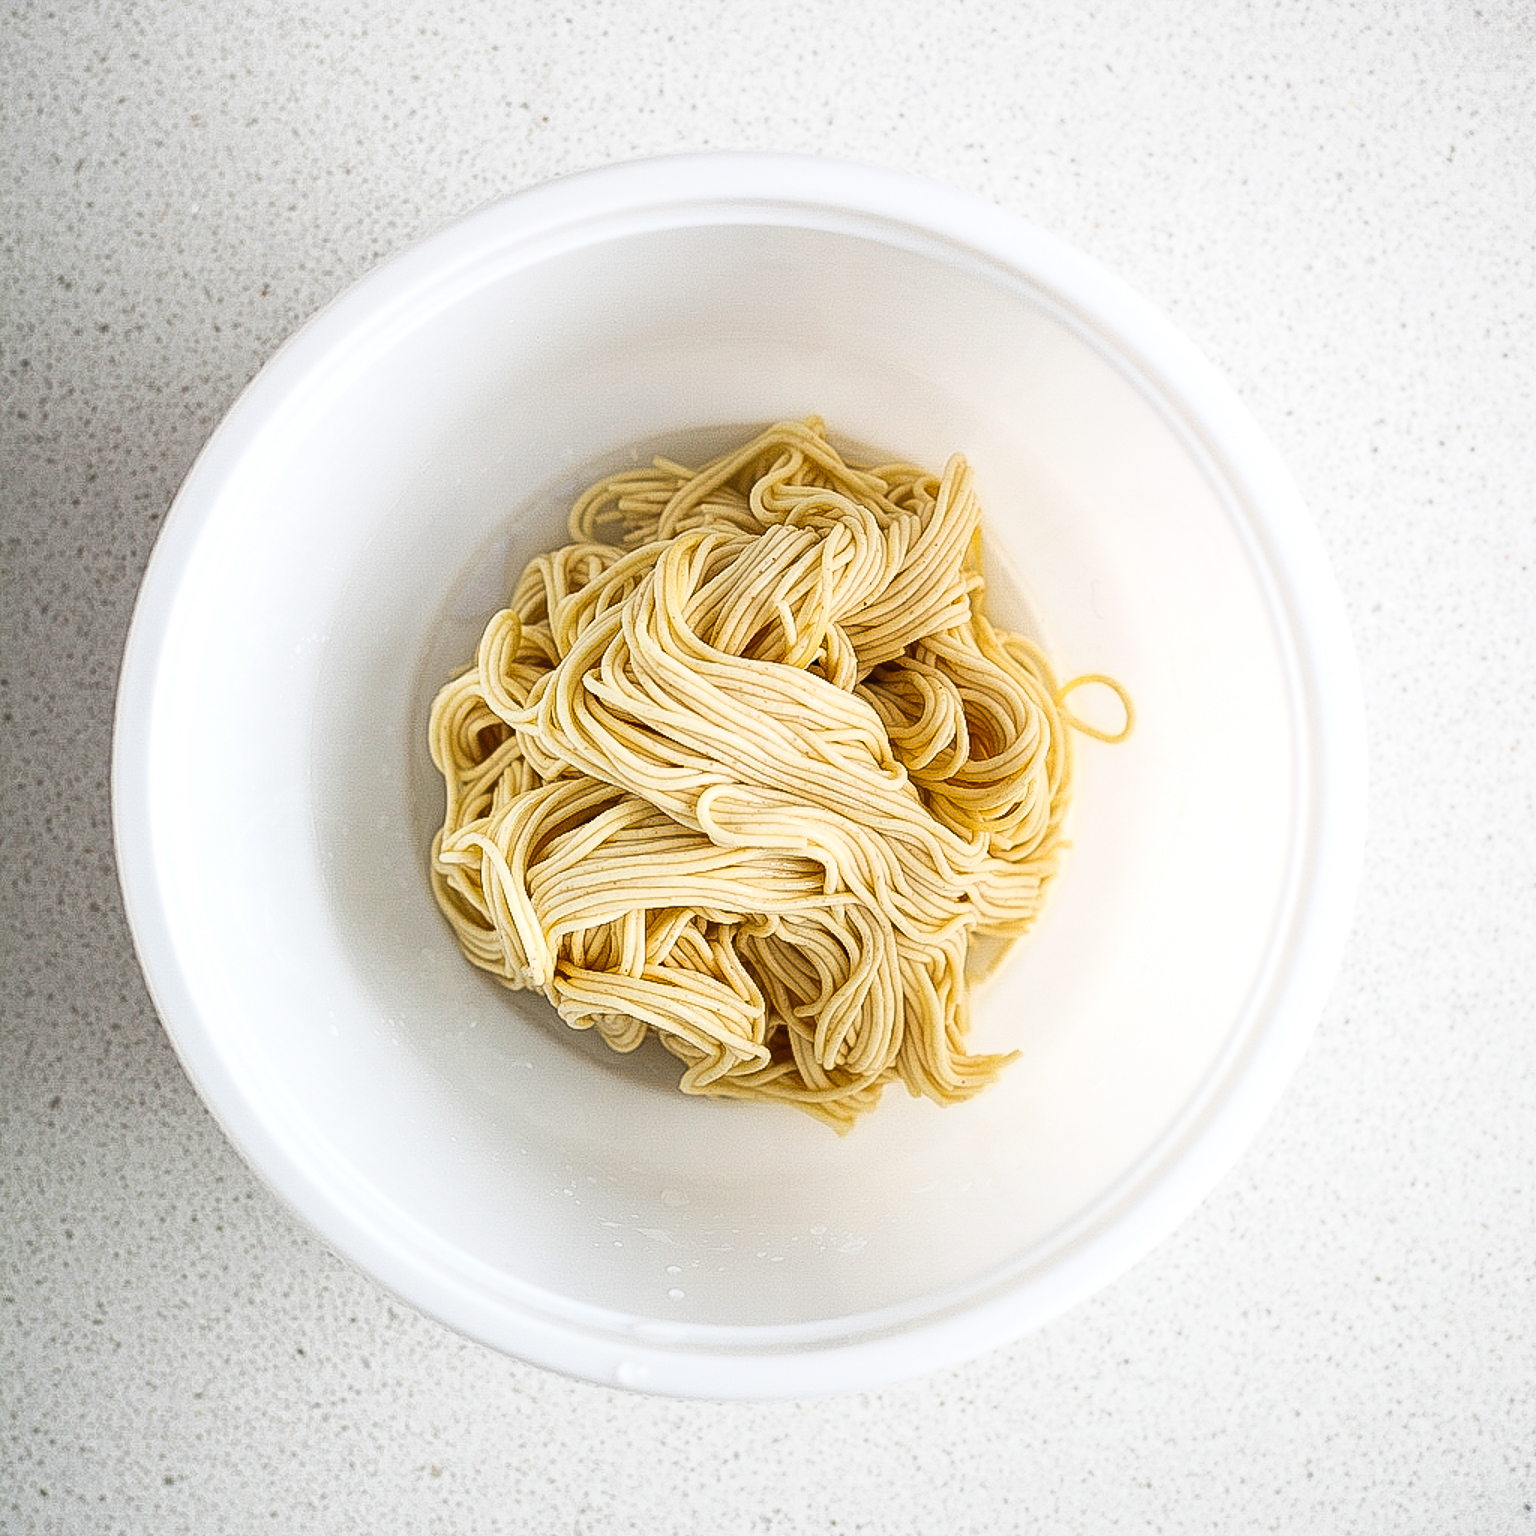 Reconstituted Noodles @ thatothercookingblog.com